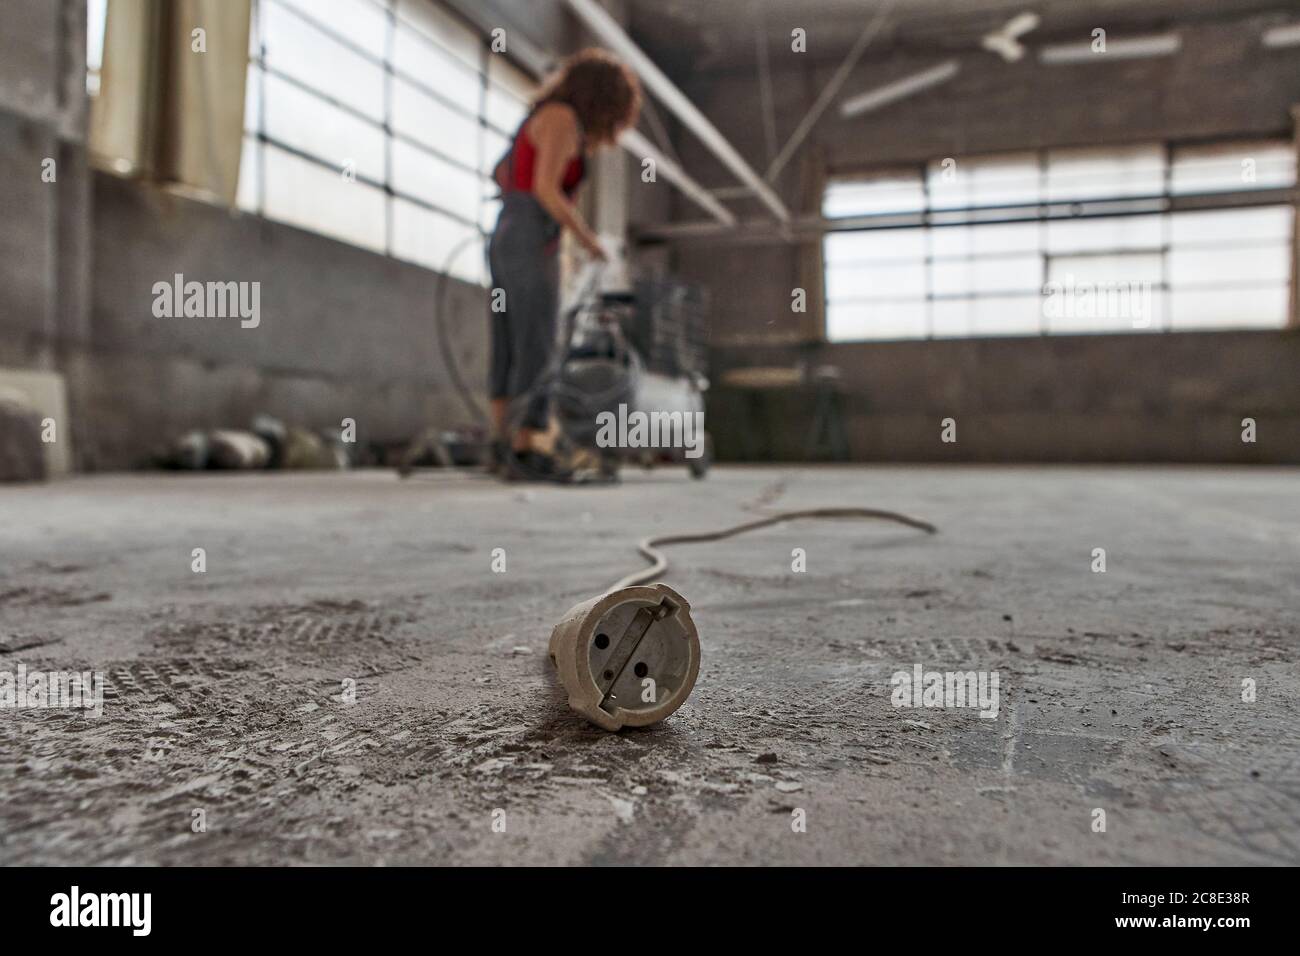 Close-up of cable on floor with woman hauling compressor in background at workshop Stock Photo